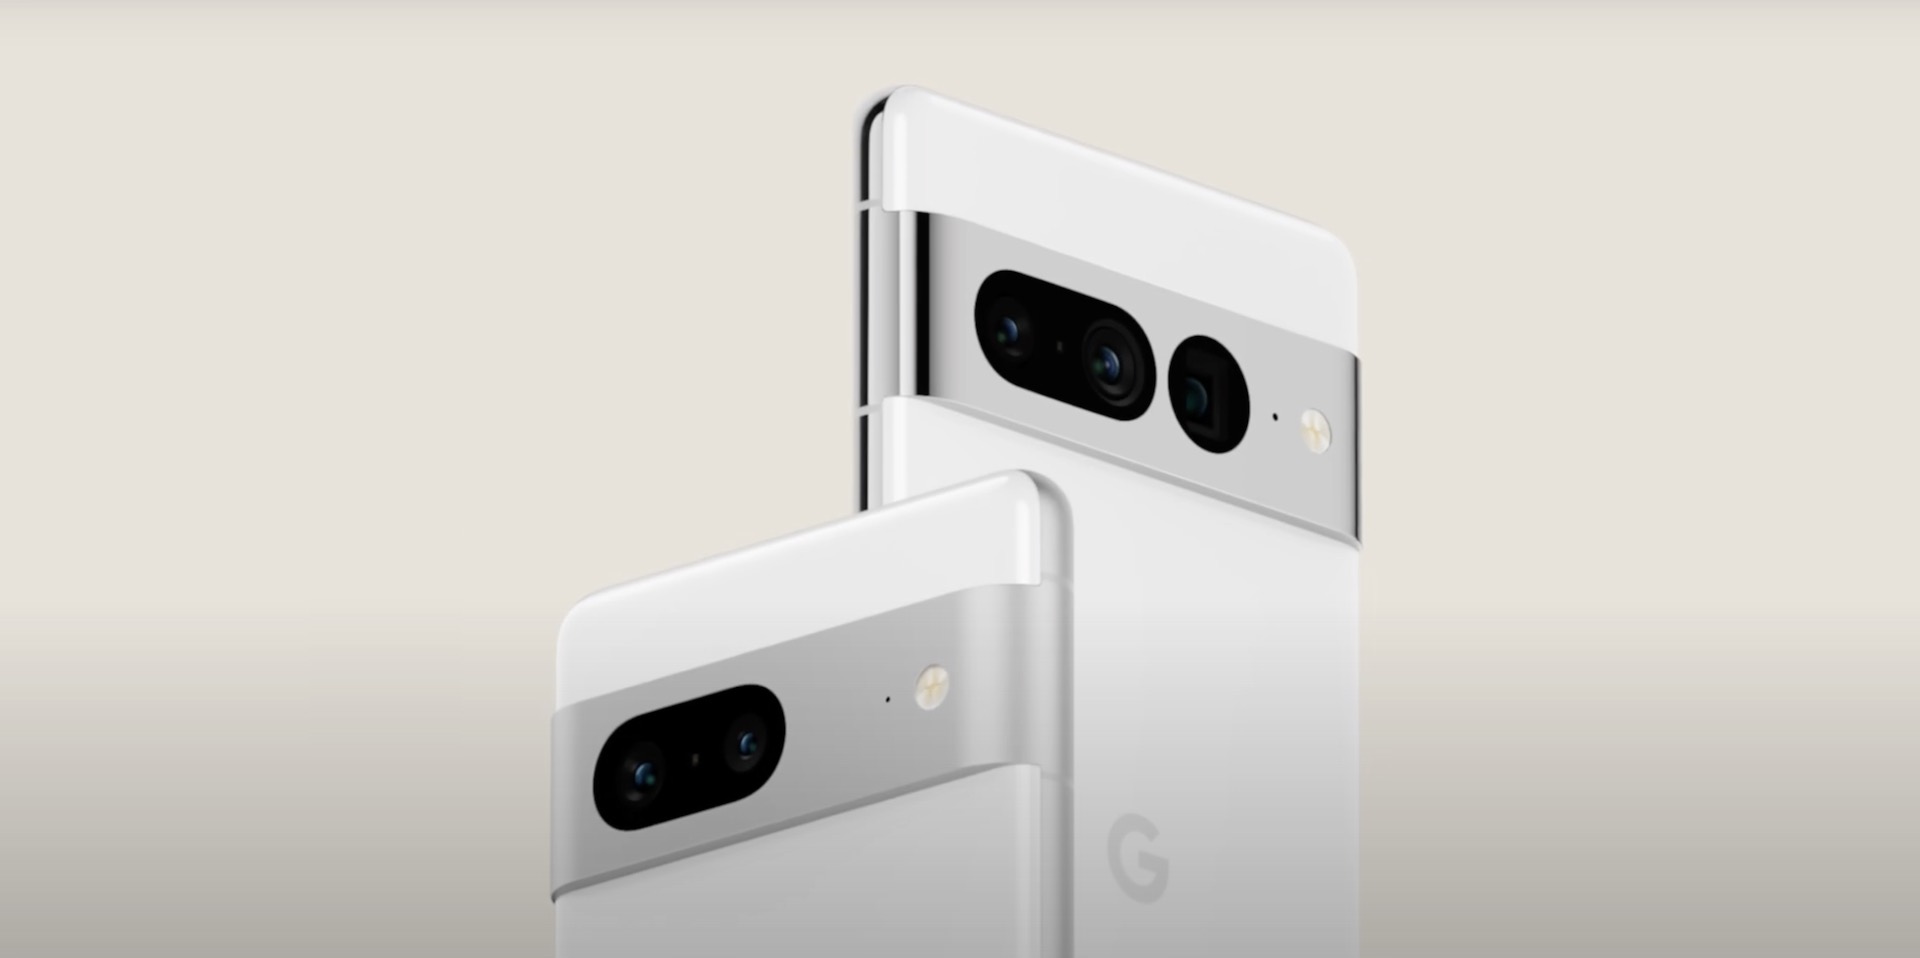 Along with Google Pixel 6a, the presentation showed a minimum of Pixel 7 and Pixel 7 Pro